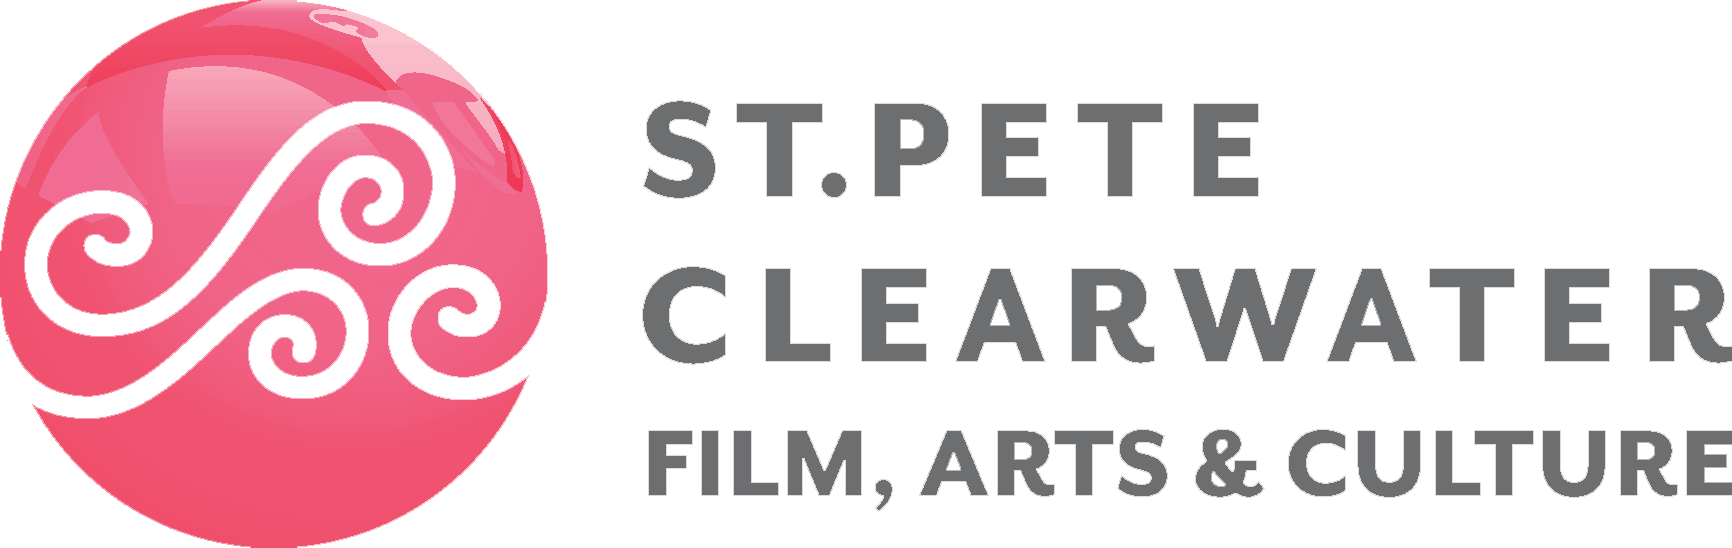 St. Petersburg Clearwater Film Commission